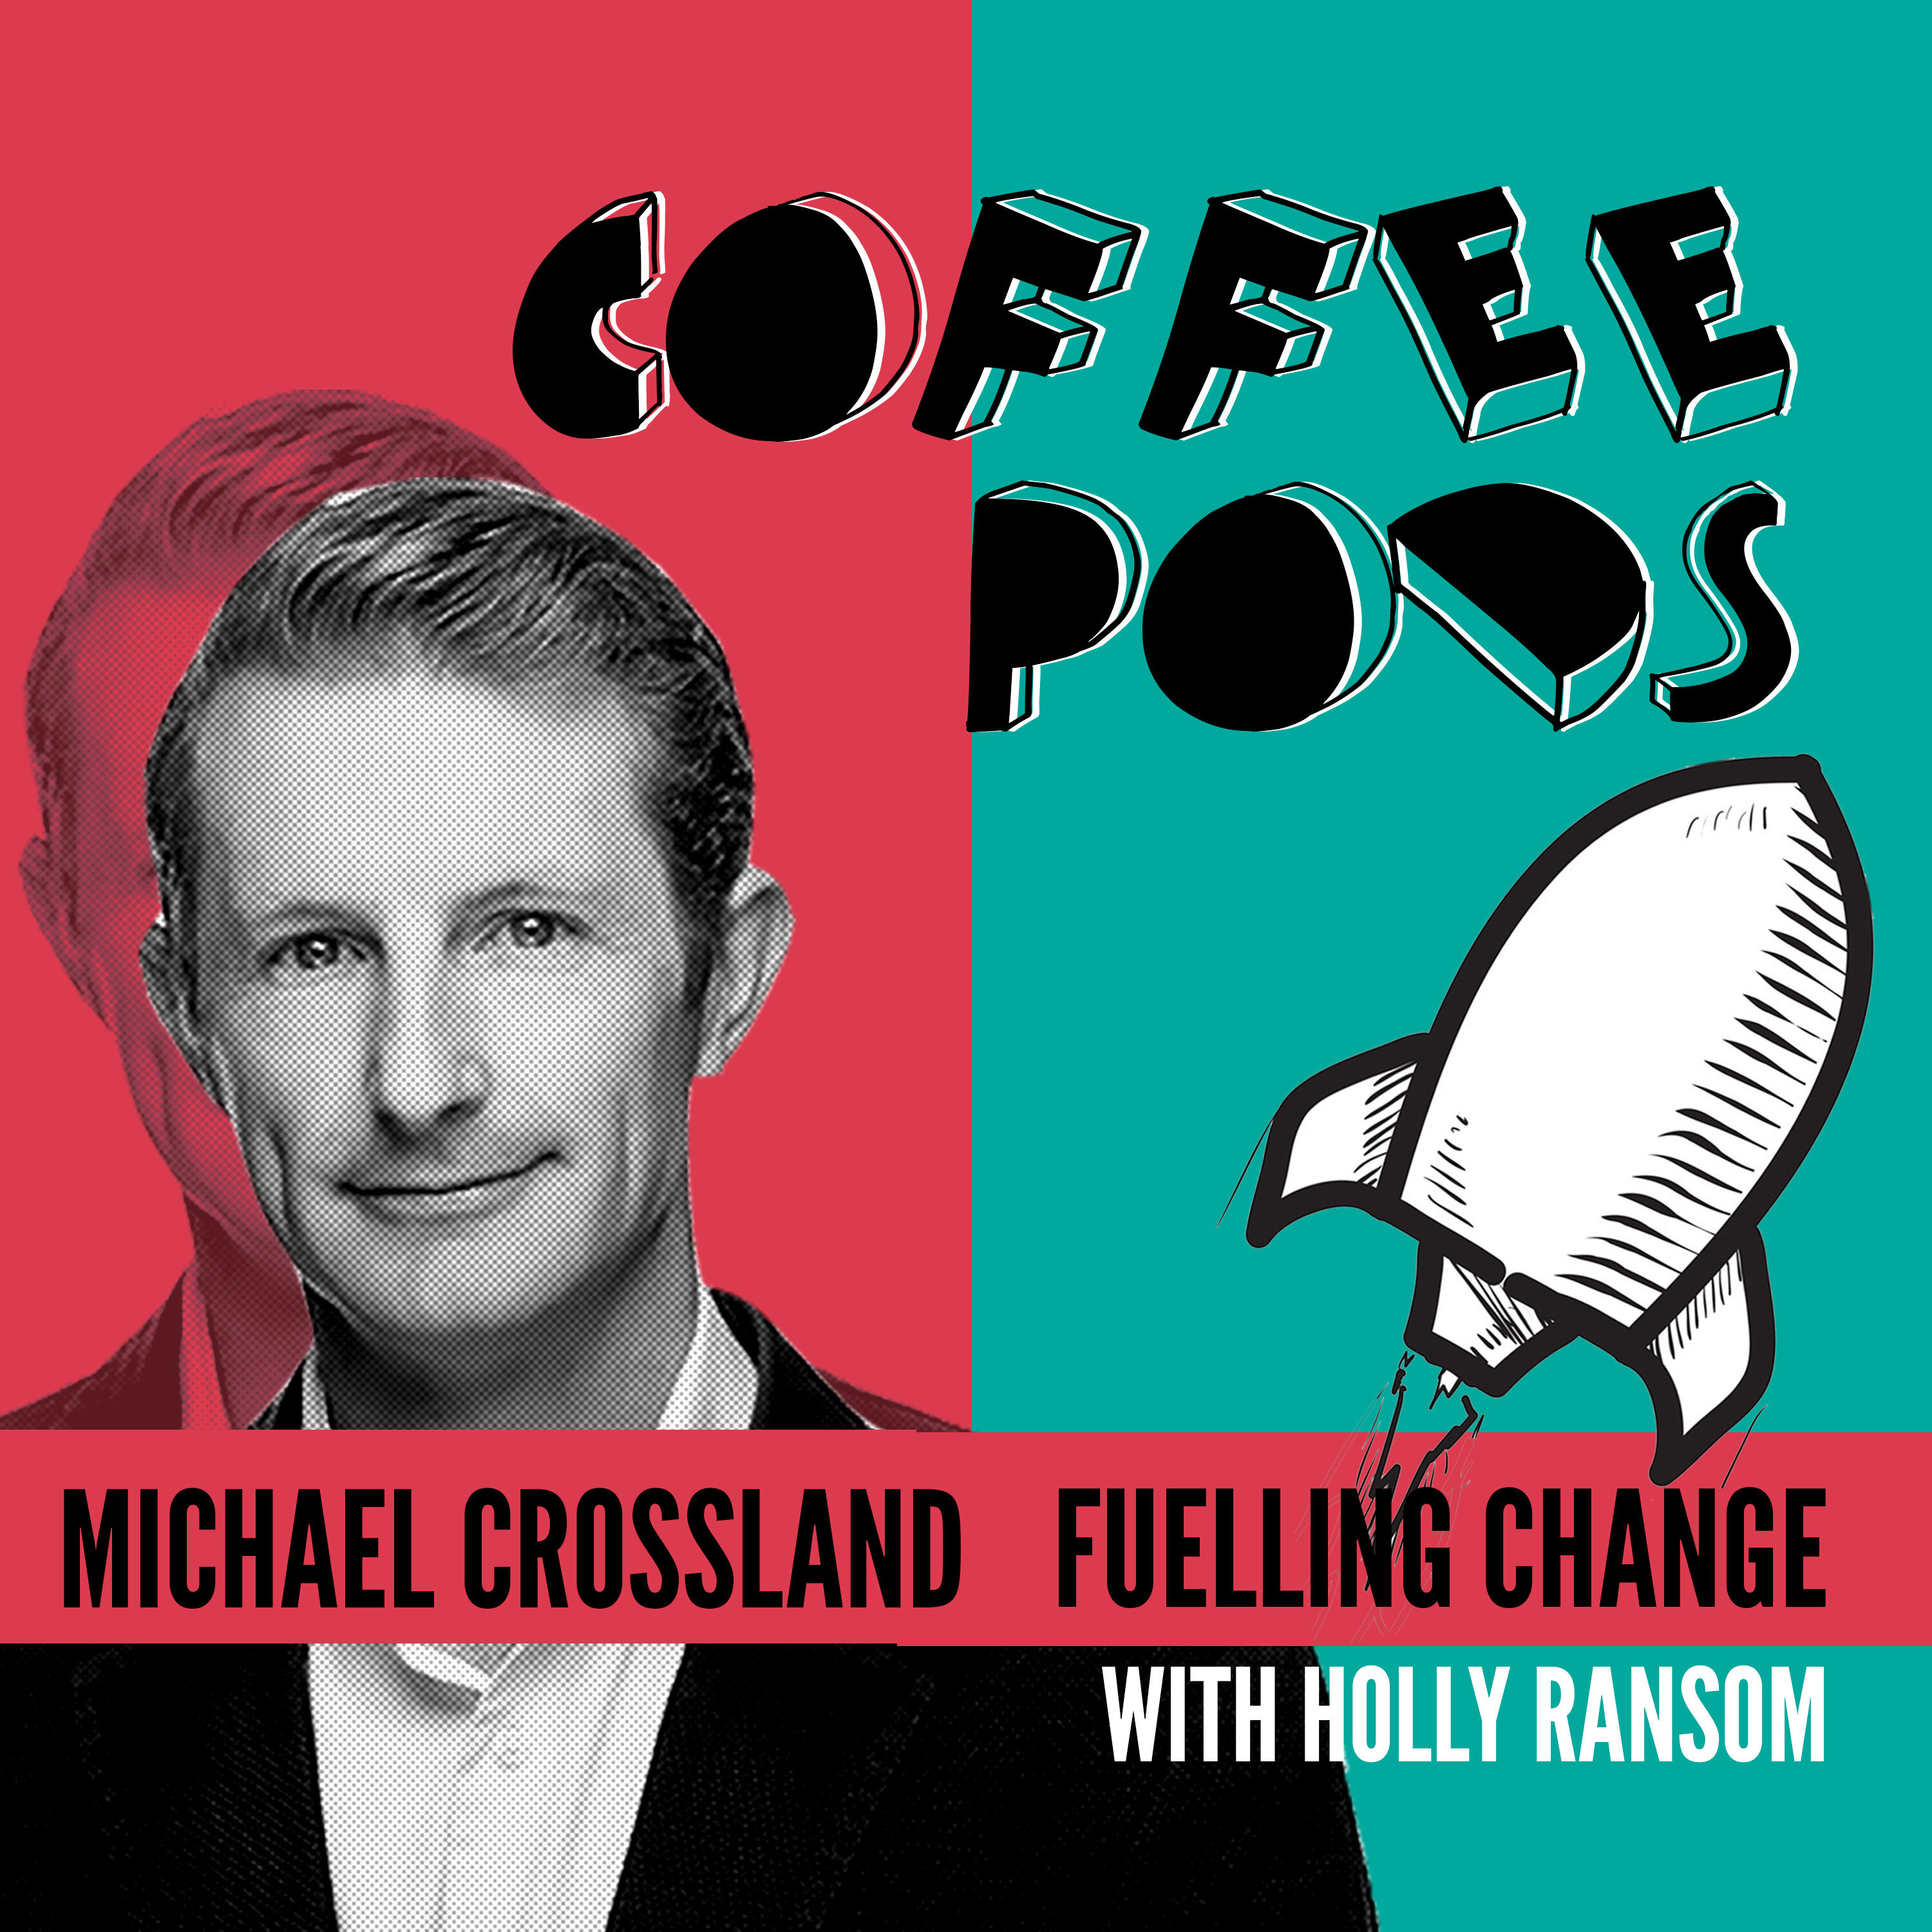 Coffee Pod #72: Globally sought-after inspirational speaker Michael Crossland turns heart-breaking adversity into powerful fuel for change